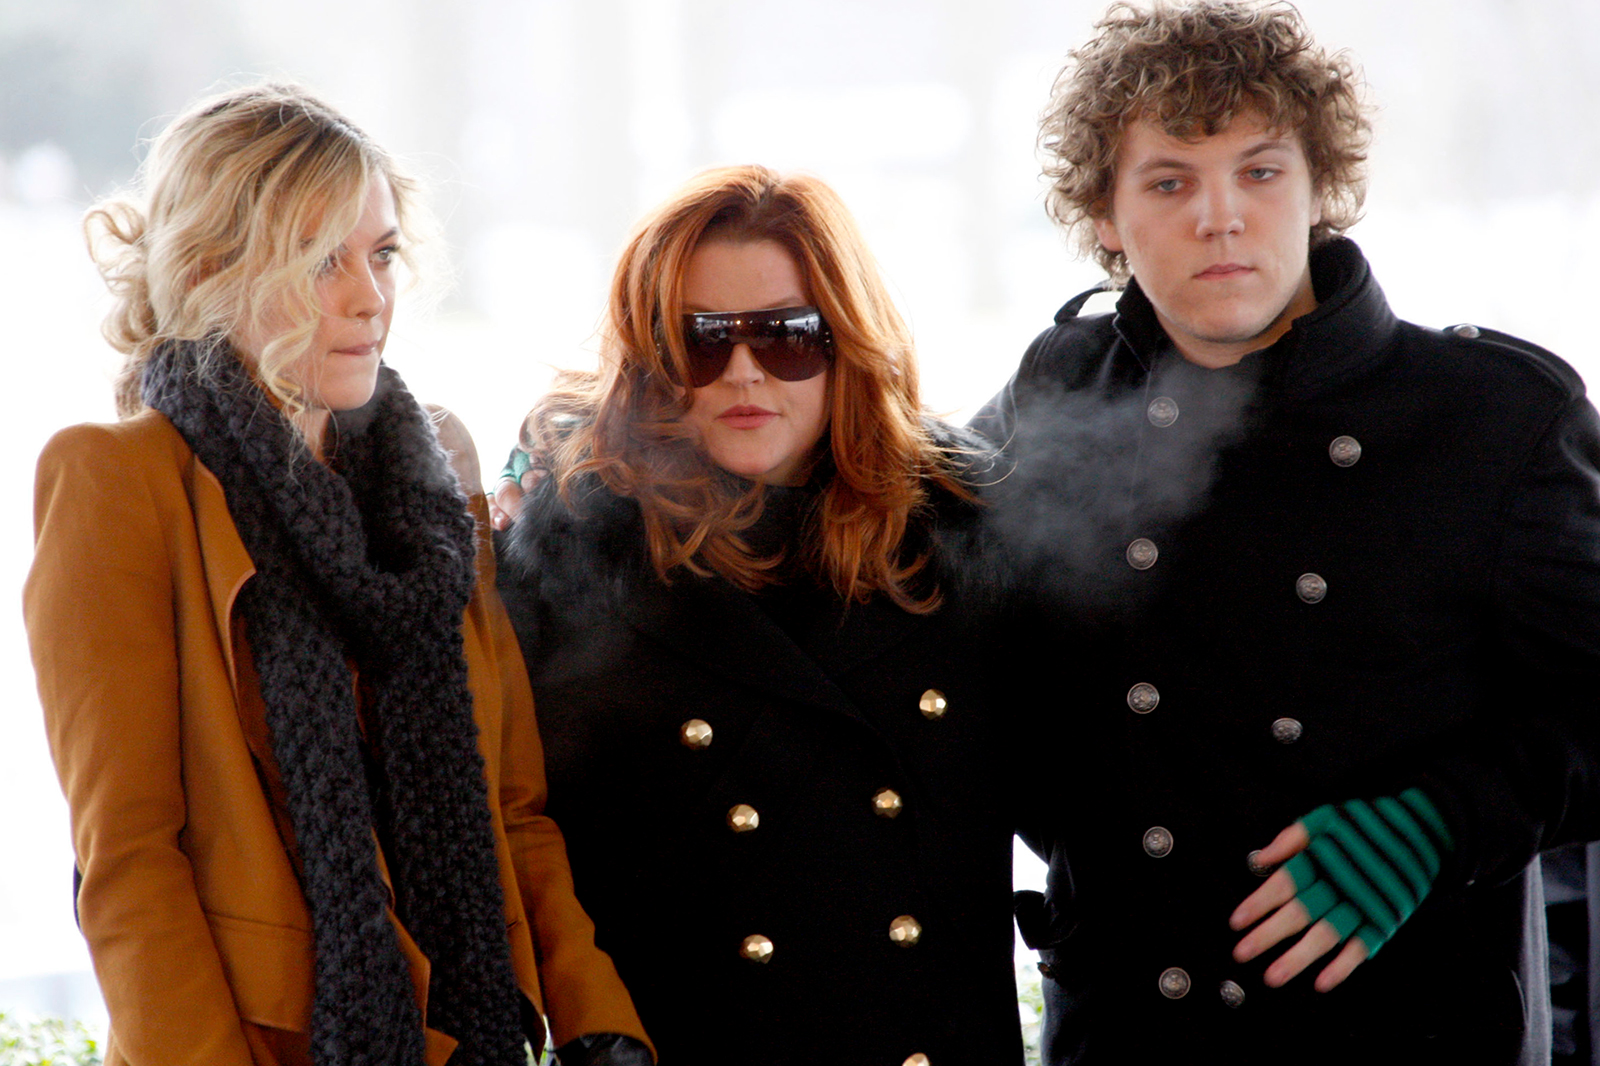 Lisa Marie Presley (C), with her children Riley and Benjamin Keough (R), attend the 75th birthday celebration for Elvis Presley in Memphis, Tennessee on January 8, 2010. 